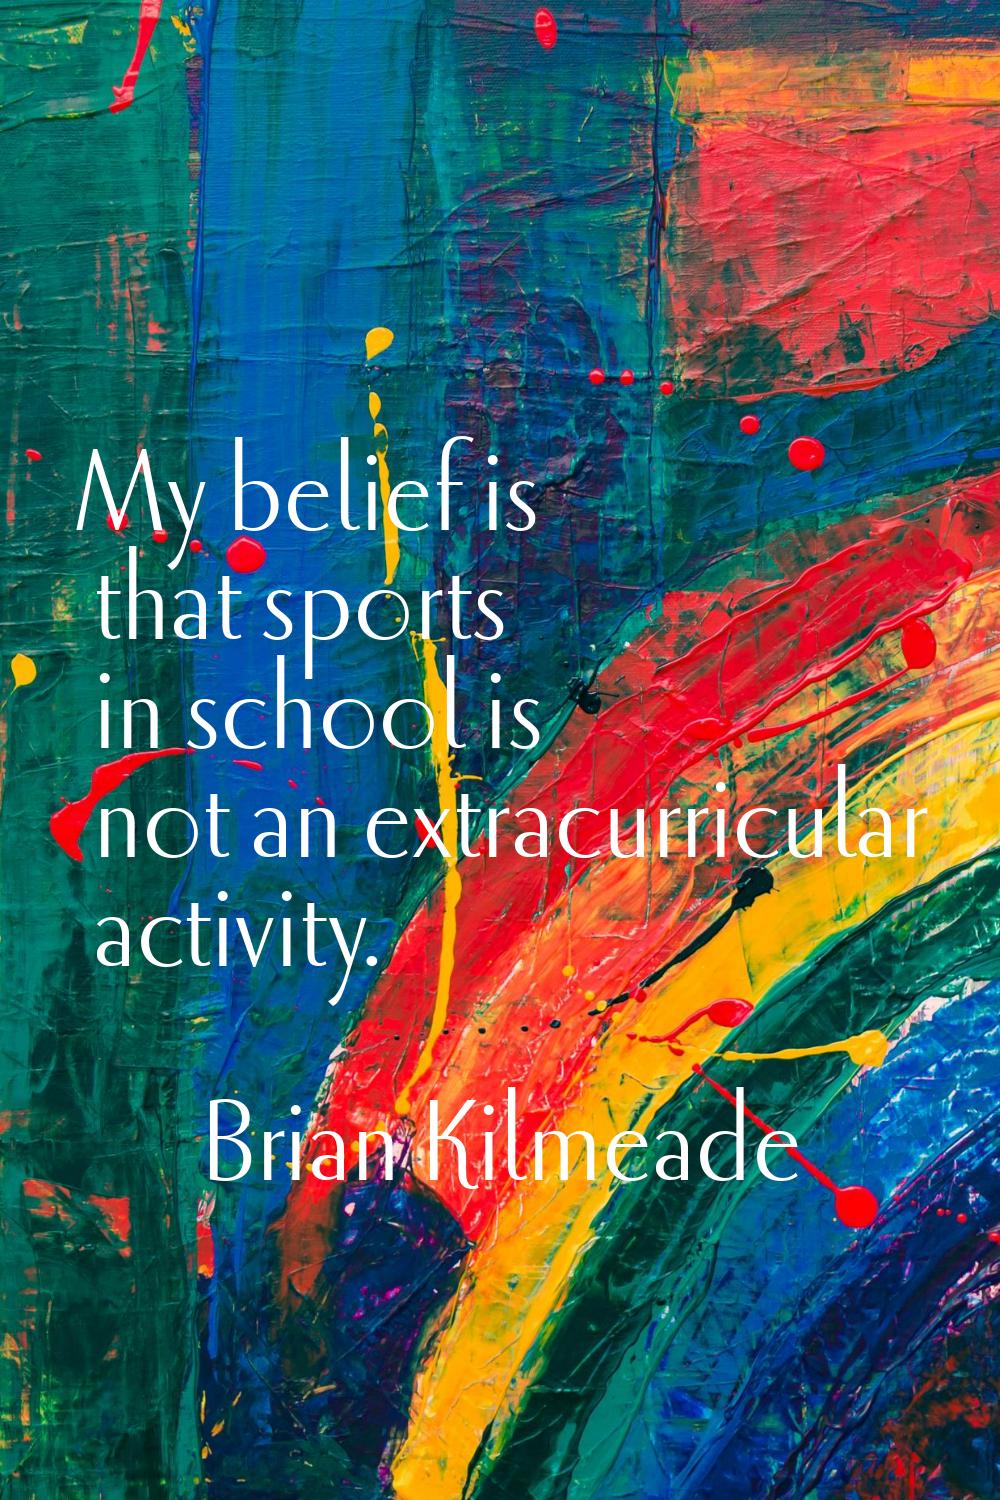 My belief is that sports in school is not an extracurricular activity.